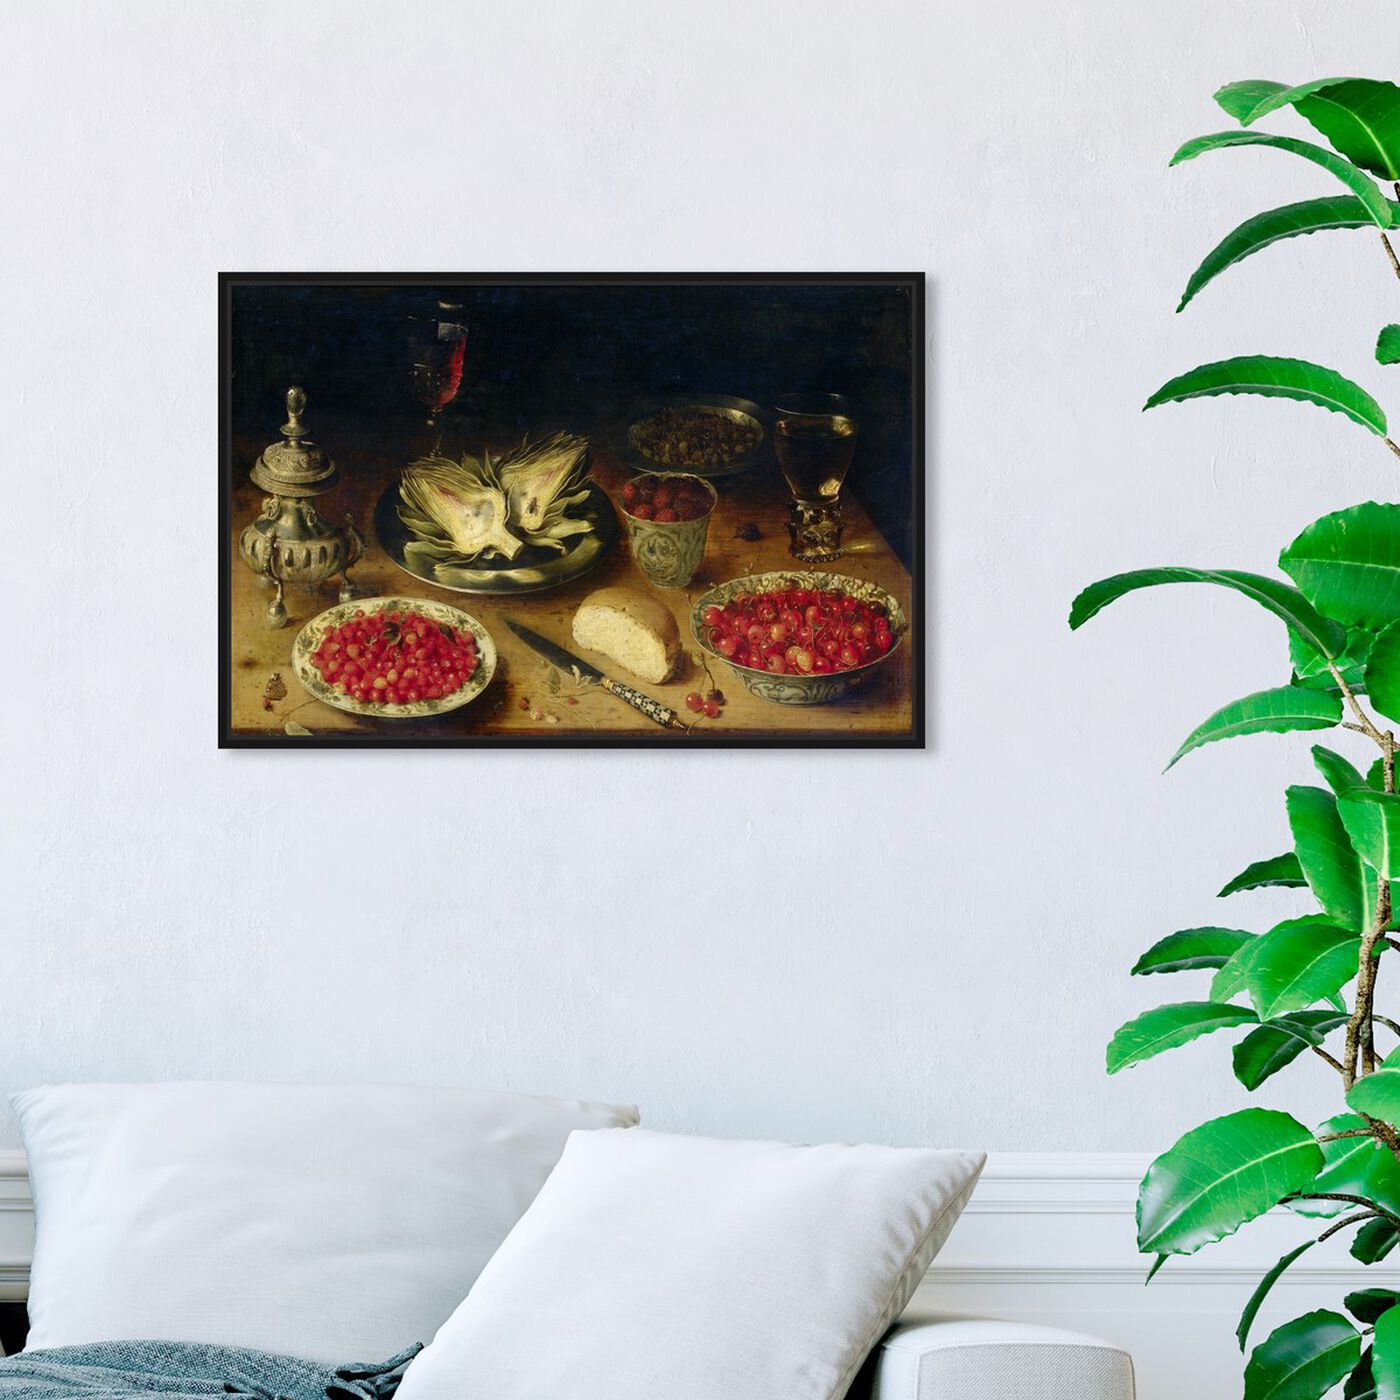 Hanging view of Arranged Dinner Table - The Art Cabinet featuring classic and figurative and classic art.